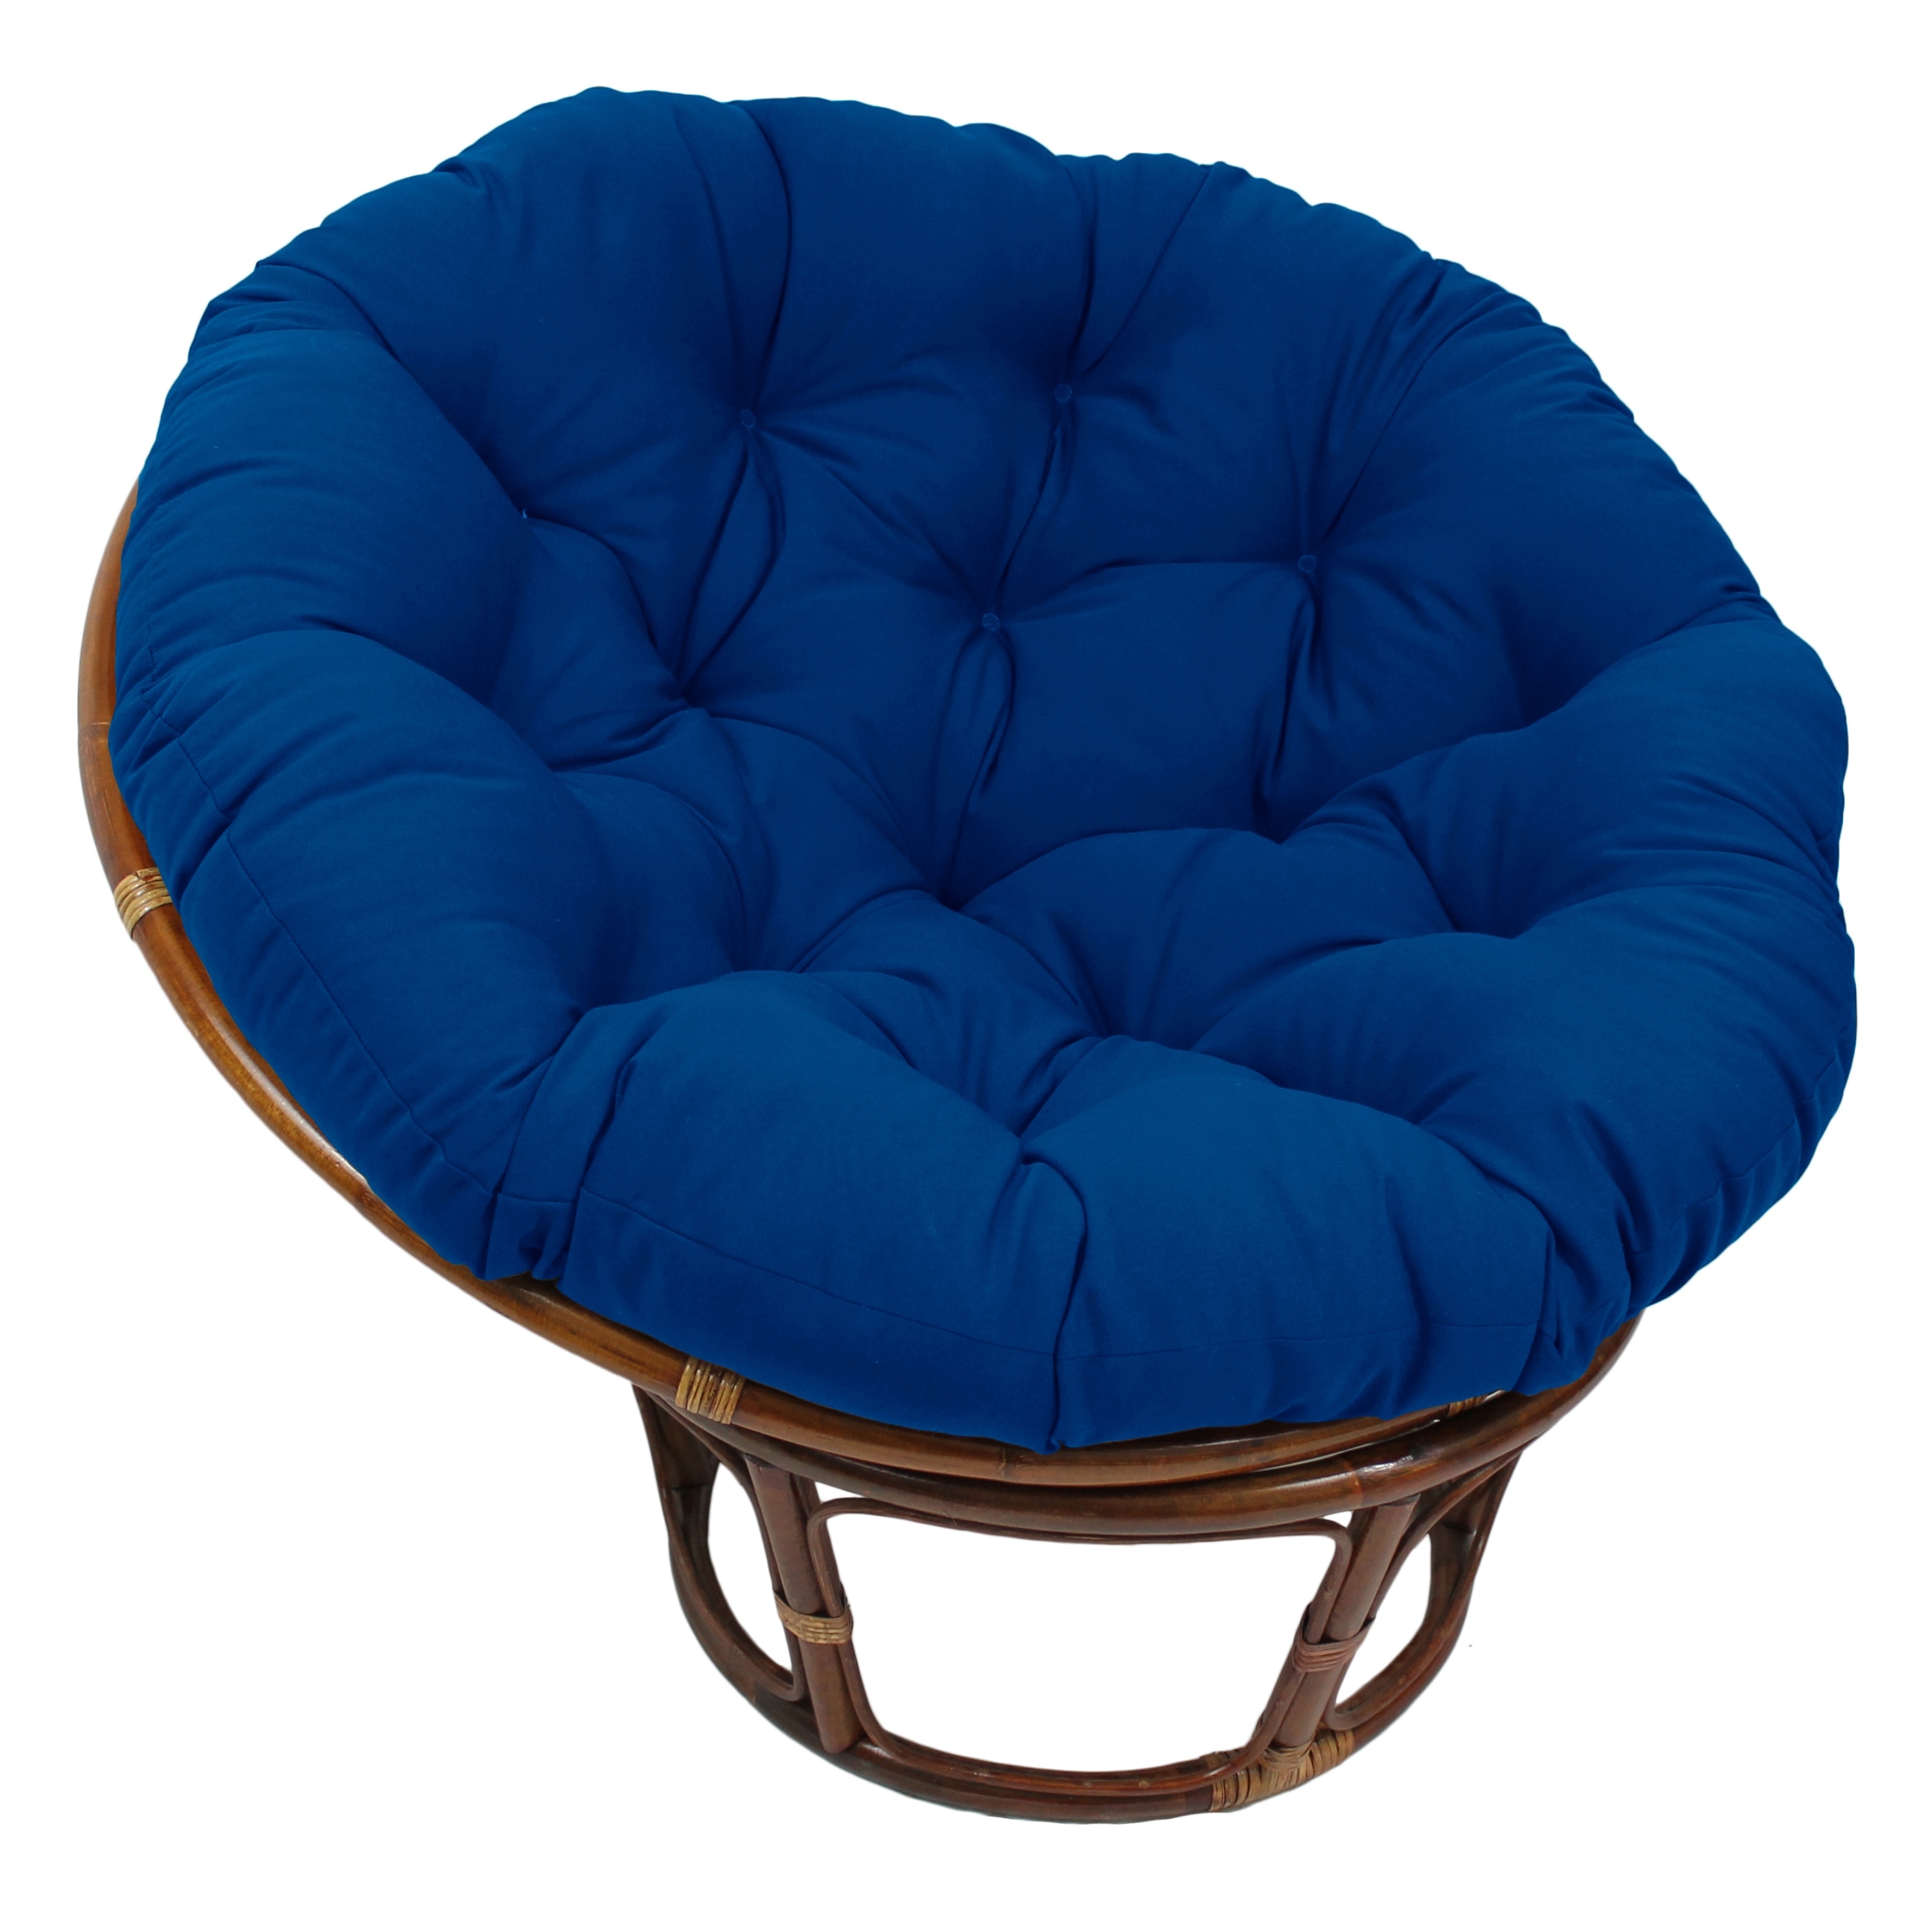 https://ak1.ostkcdn.com/images/products/is/images/direct/57a932389fb88be1d855cbdf929c57f2963b39ad/48-inch-Solid-Twill-Papasan-Cushion-%28Cushion-Only%29.jpg